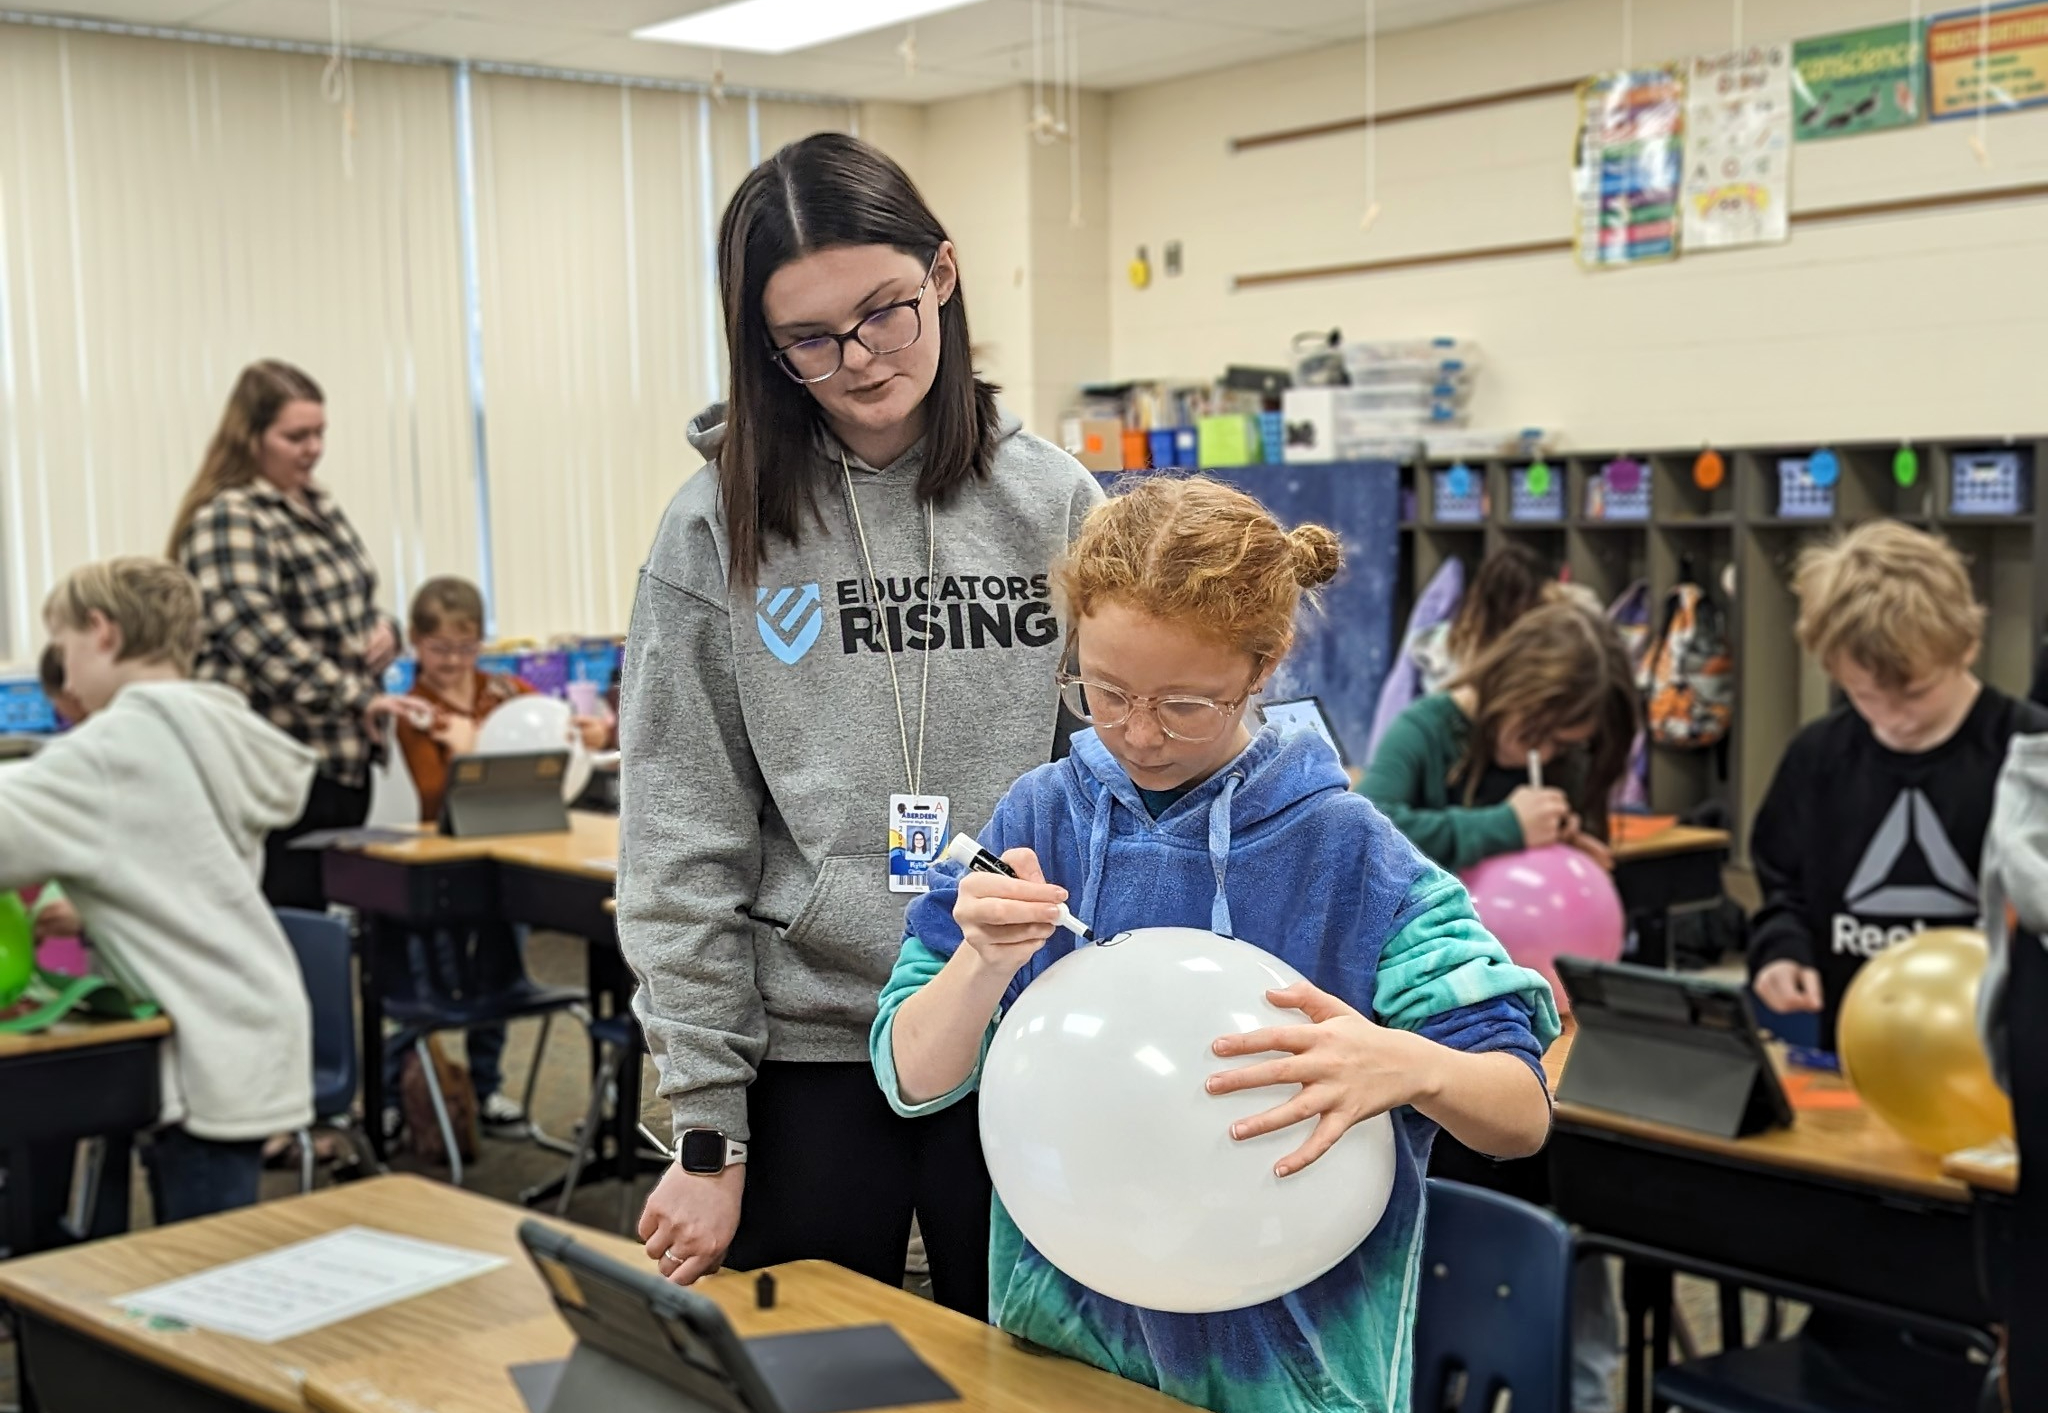 Educators Rising student helping in an elementary classroom